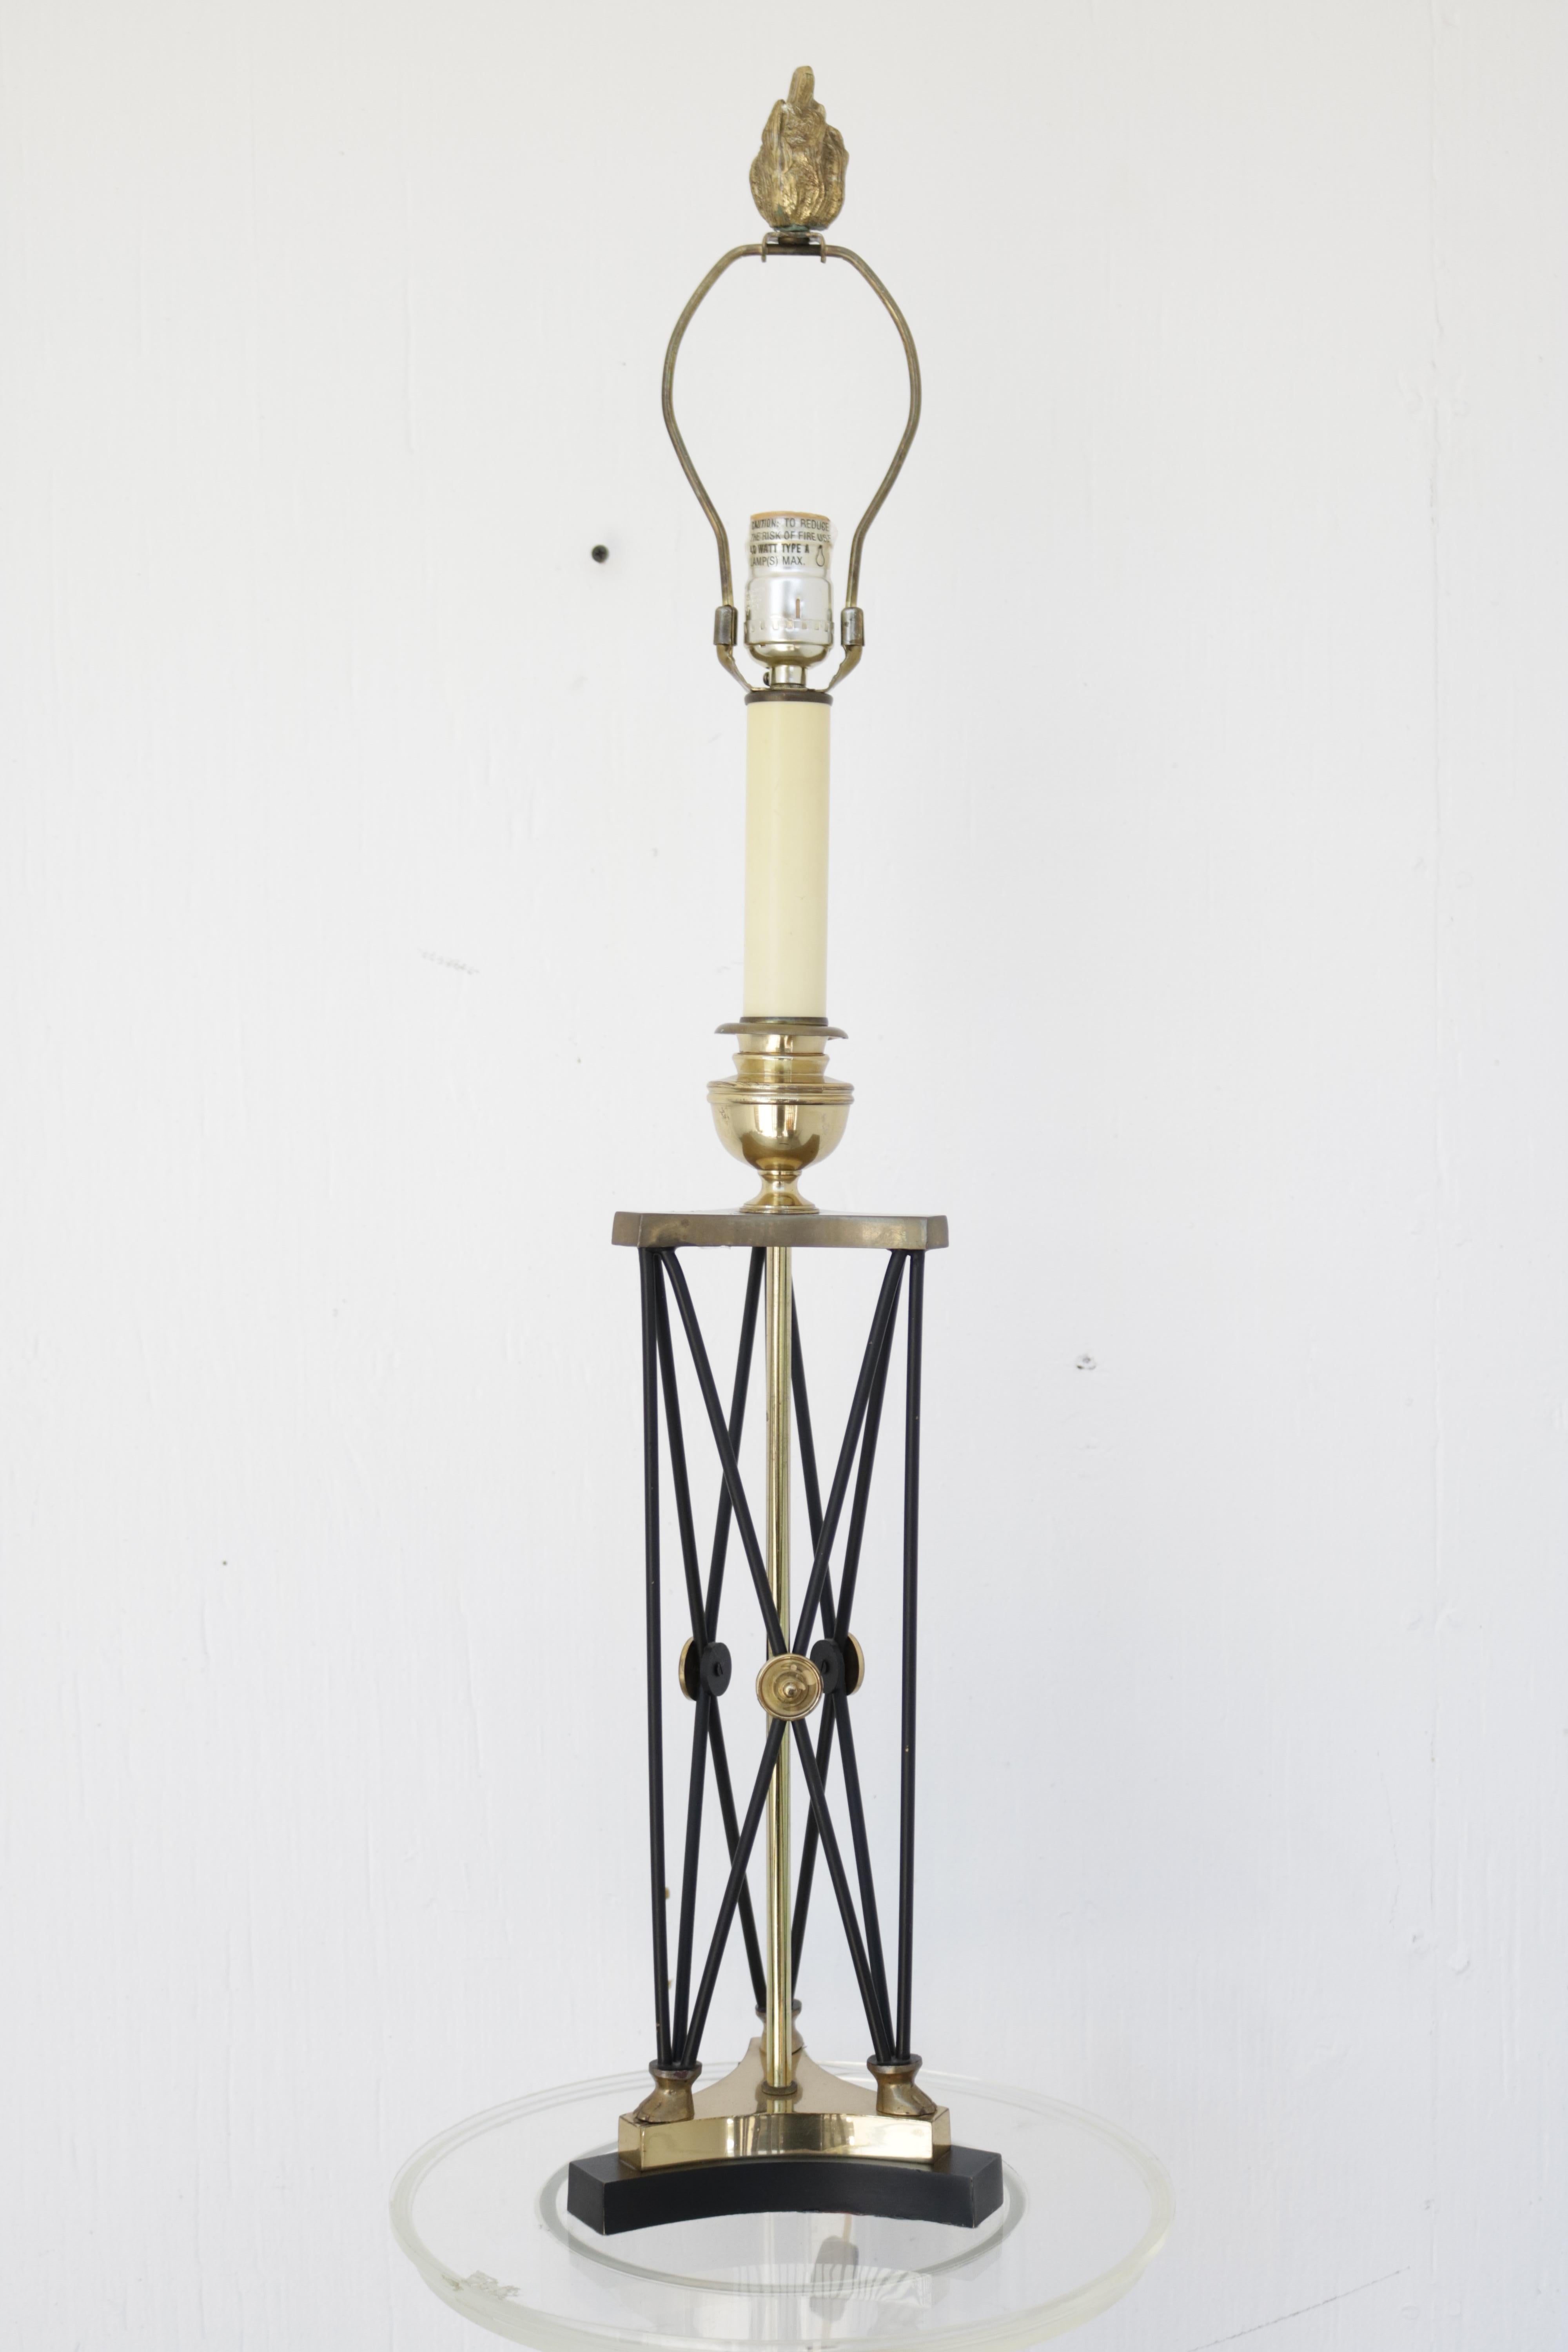 Table lamp with black steel cross hatch design on the base and brass accents. Total height with shade: 30